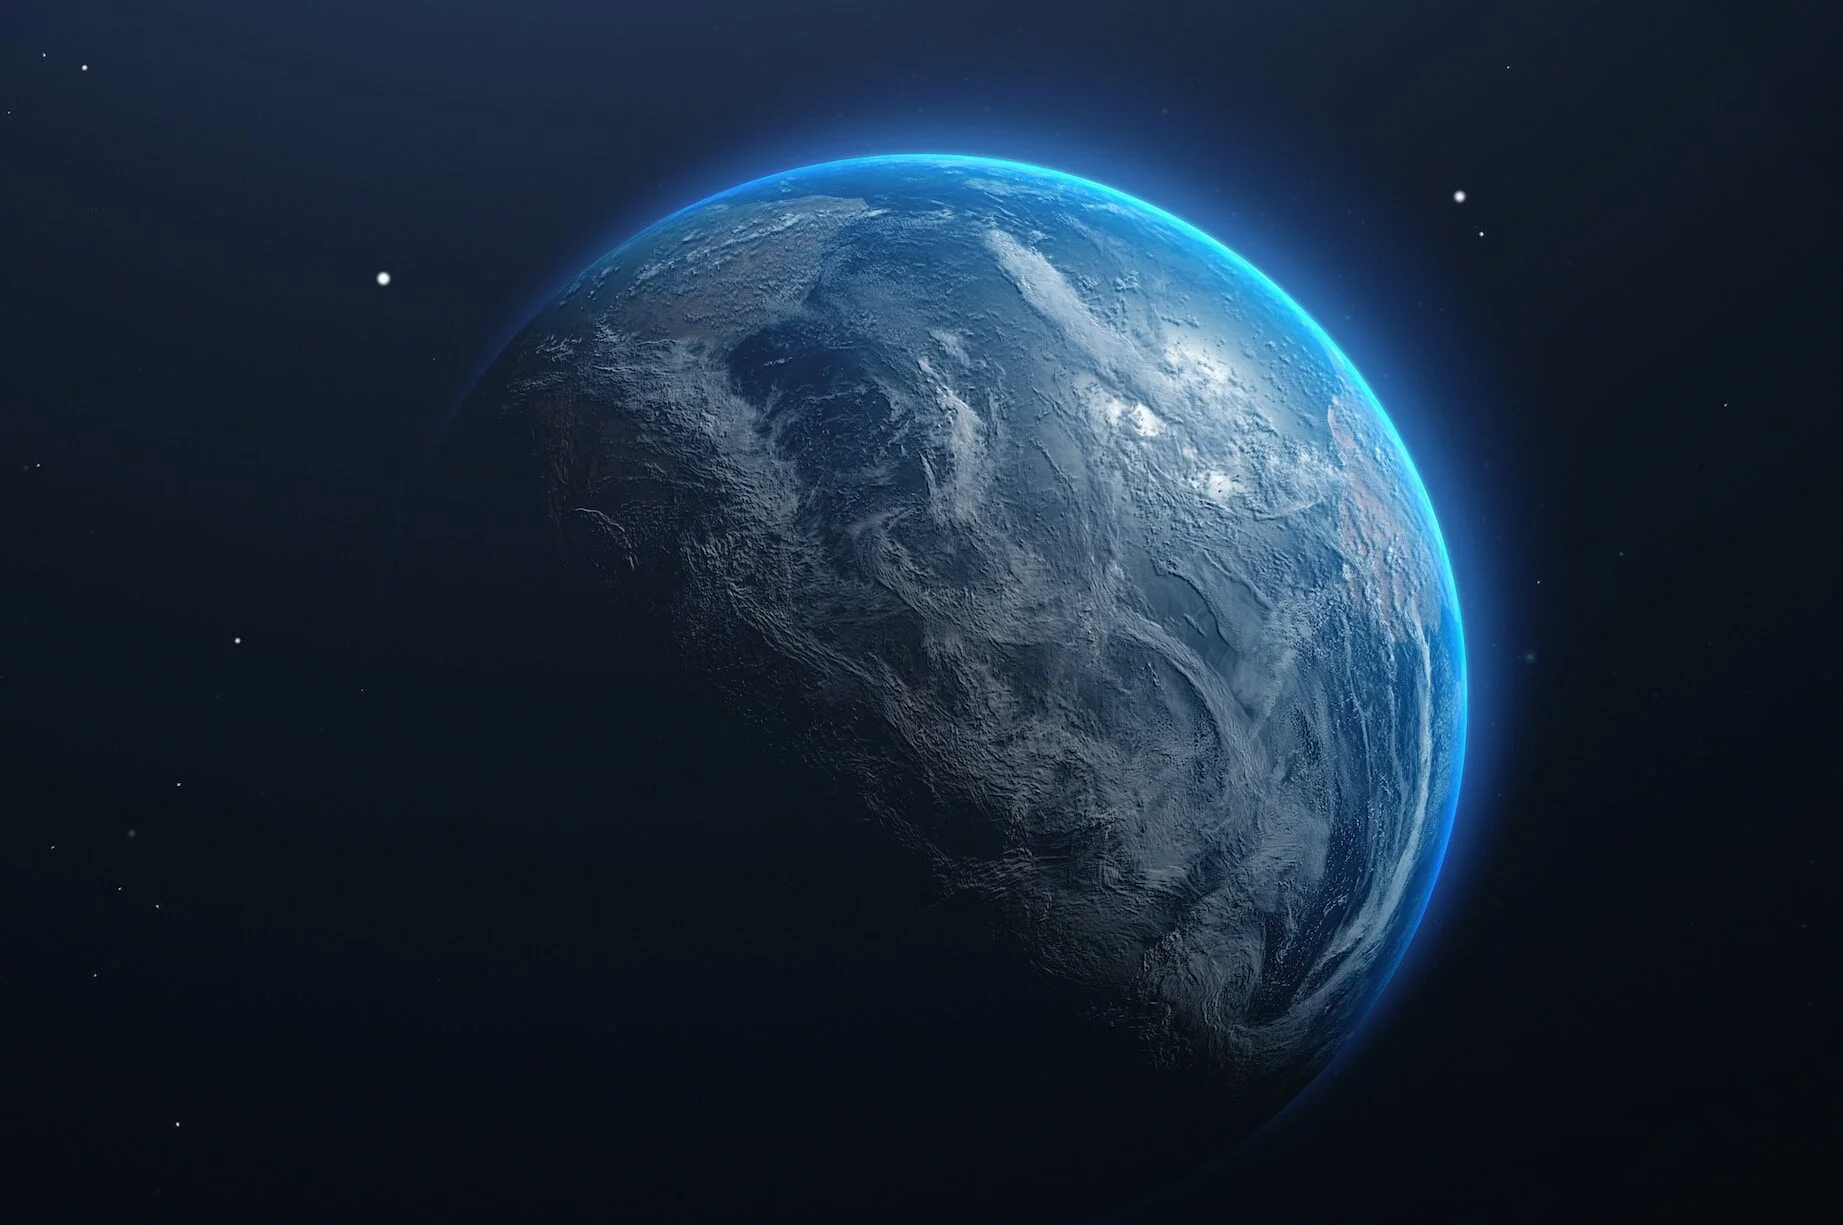 A view of earth. Be an earth-friendly consumer to protect it.